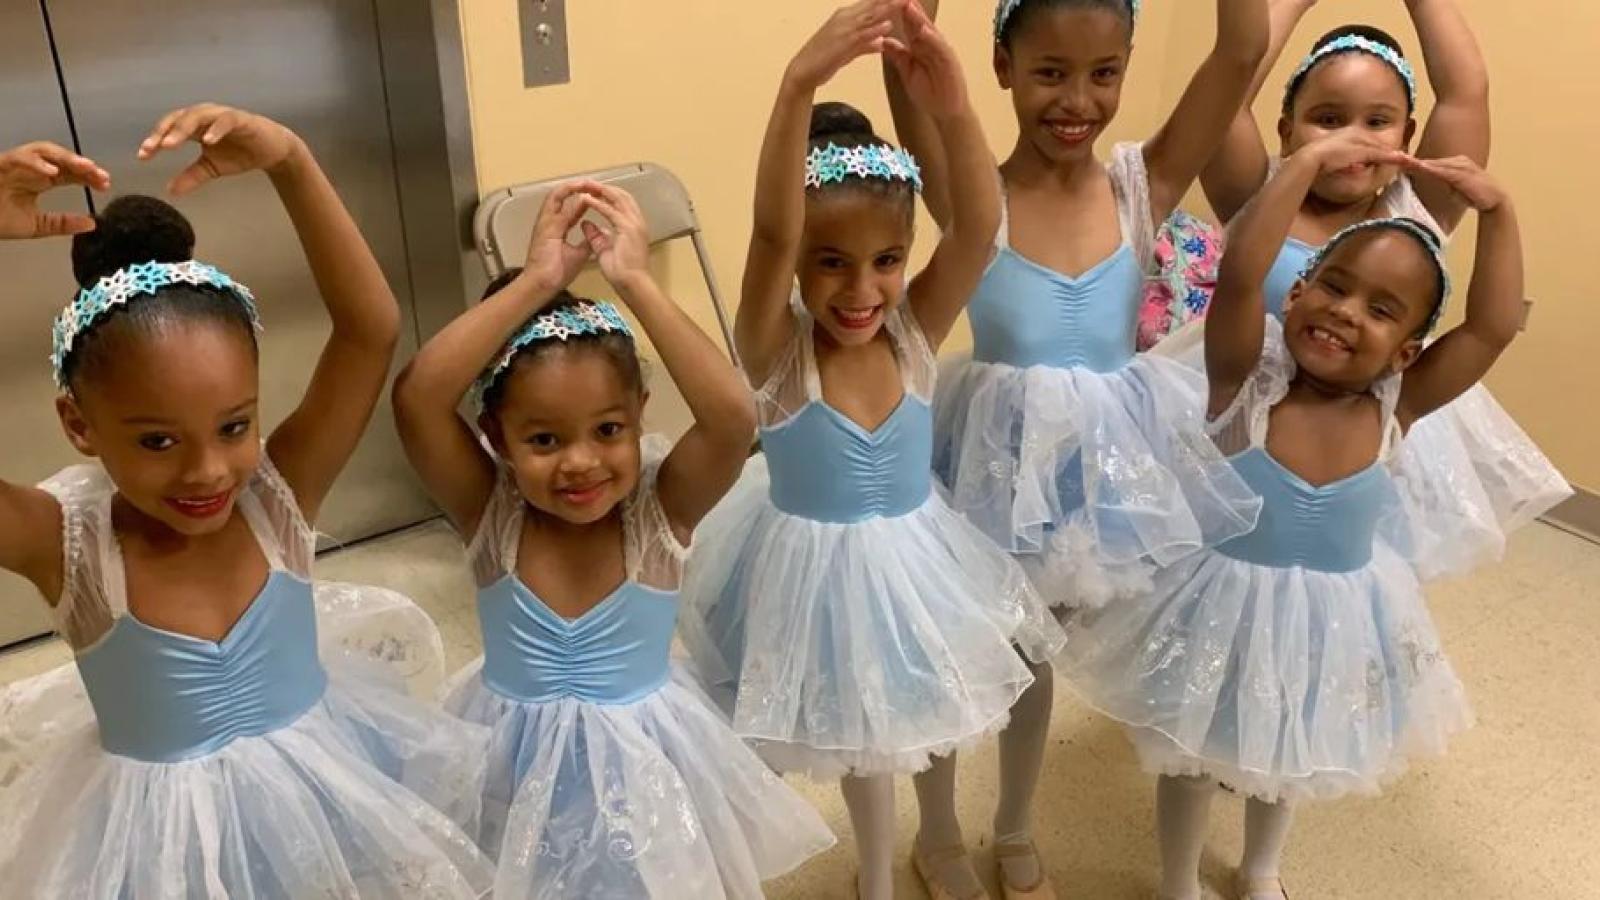 A group of young girls in leotards and tutus hold their hands above their heads in a ballet pose